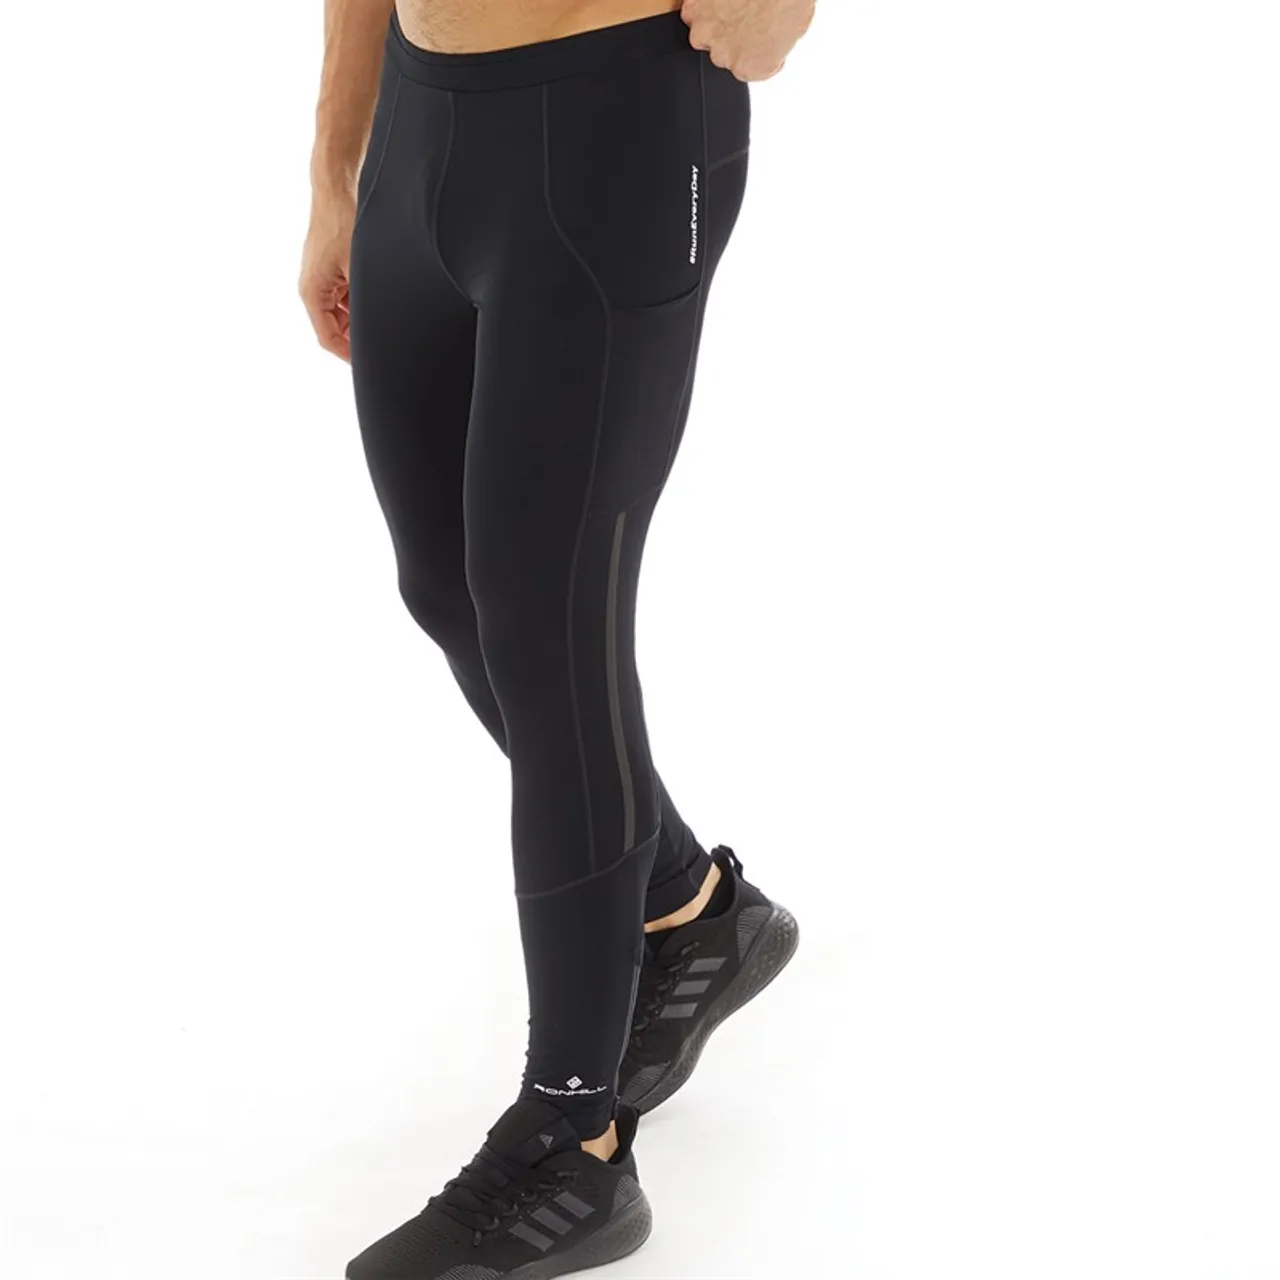 Ron Hill Mens Ronhill Tech Revive Stretch Running Tights Black